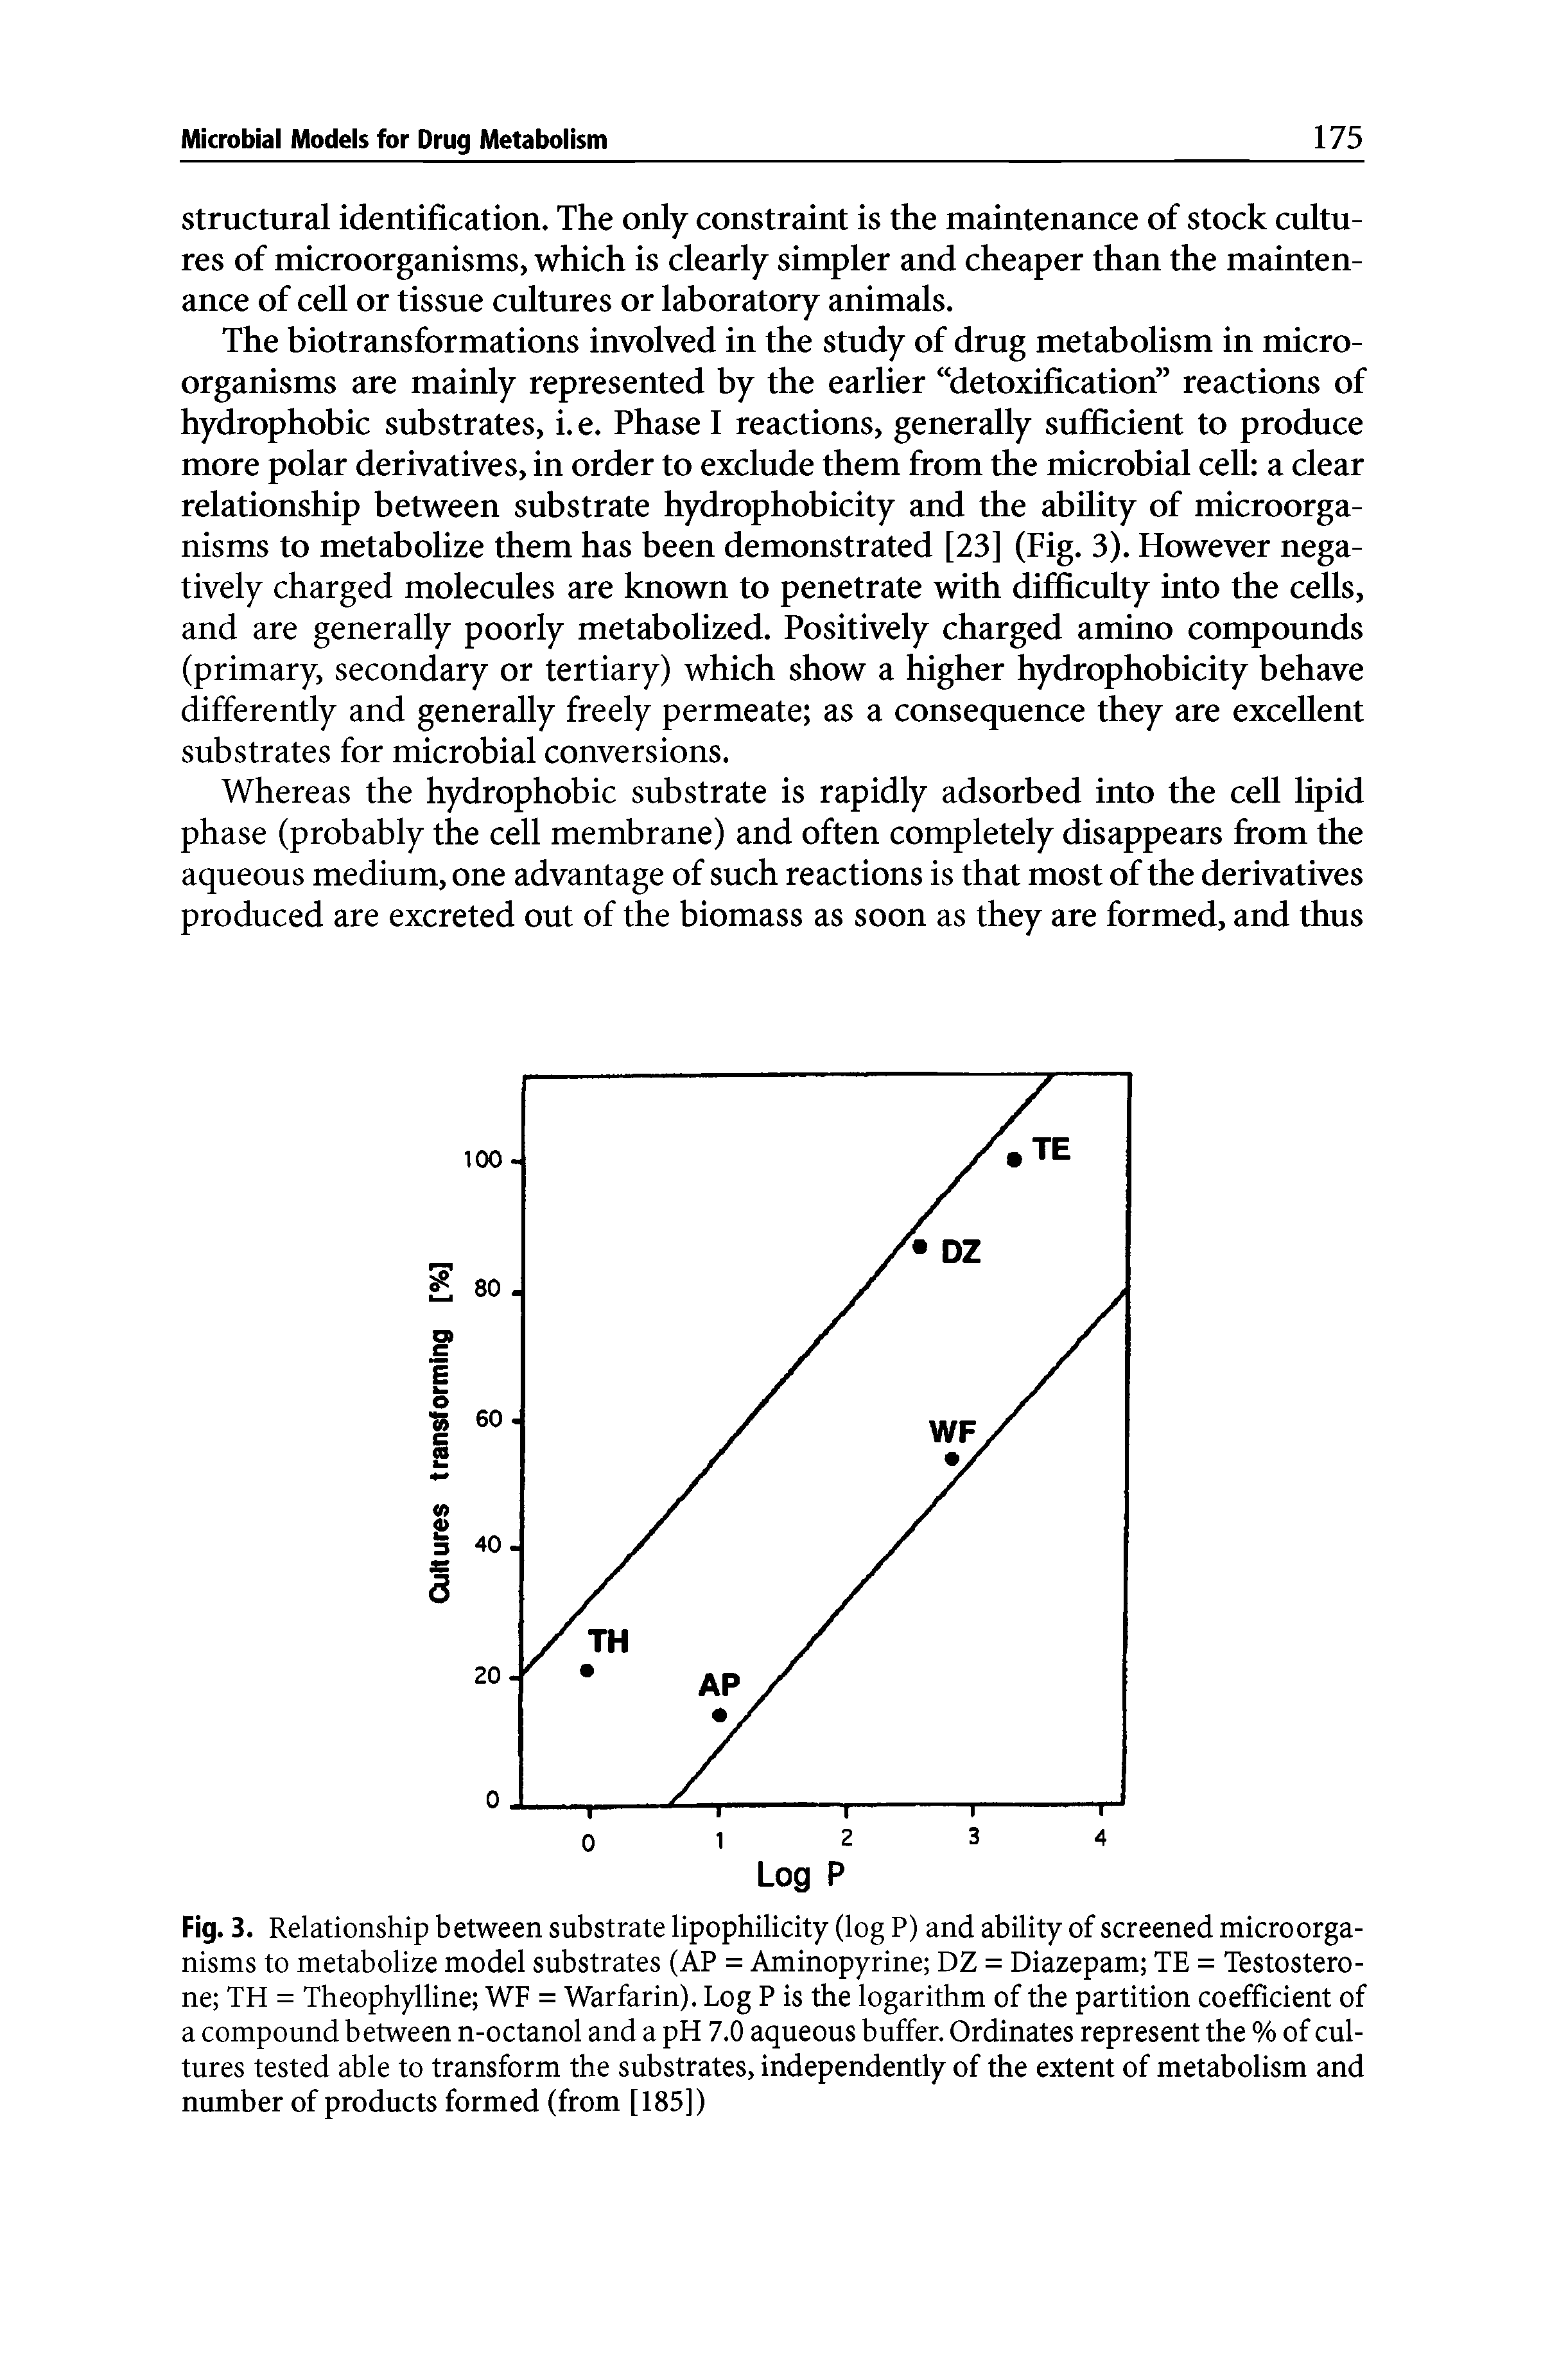 Fig. 3. Relationship between substrate lipophilicity (log P) and ability of screened microorganisms to metabolize model substrates (AP = Aminopyrine DZ = Diazepam TE = Testosterone TH = Theophylline WF = Warfarin). Log P is the logarithm of the partition coefficient of a compound between n-octanol and a pH 7.0 aqueous buffer. Ordinates represent the % of cultures tested able to transform the substrates, independently of the extent of metabolism and number of products formed (from [185])...